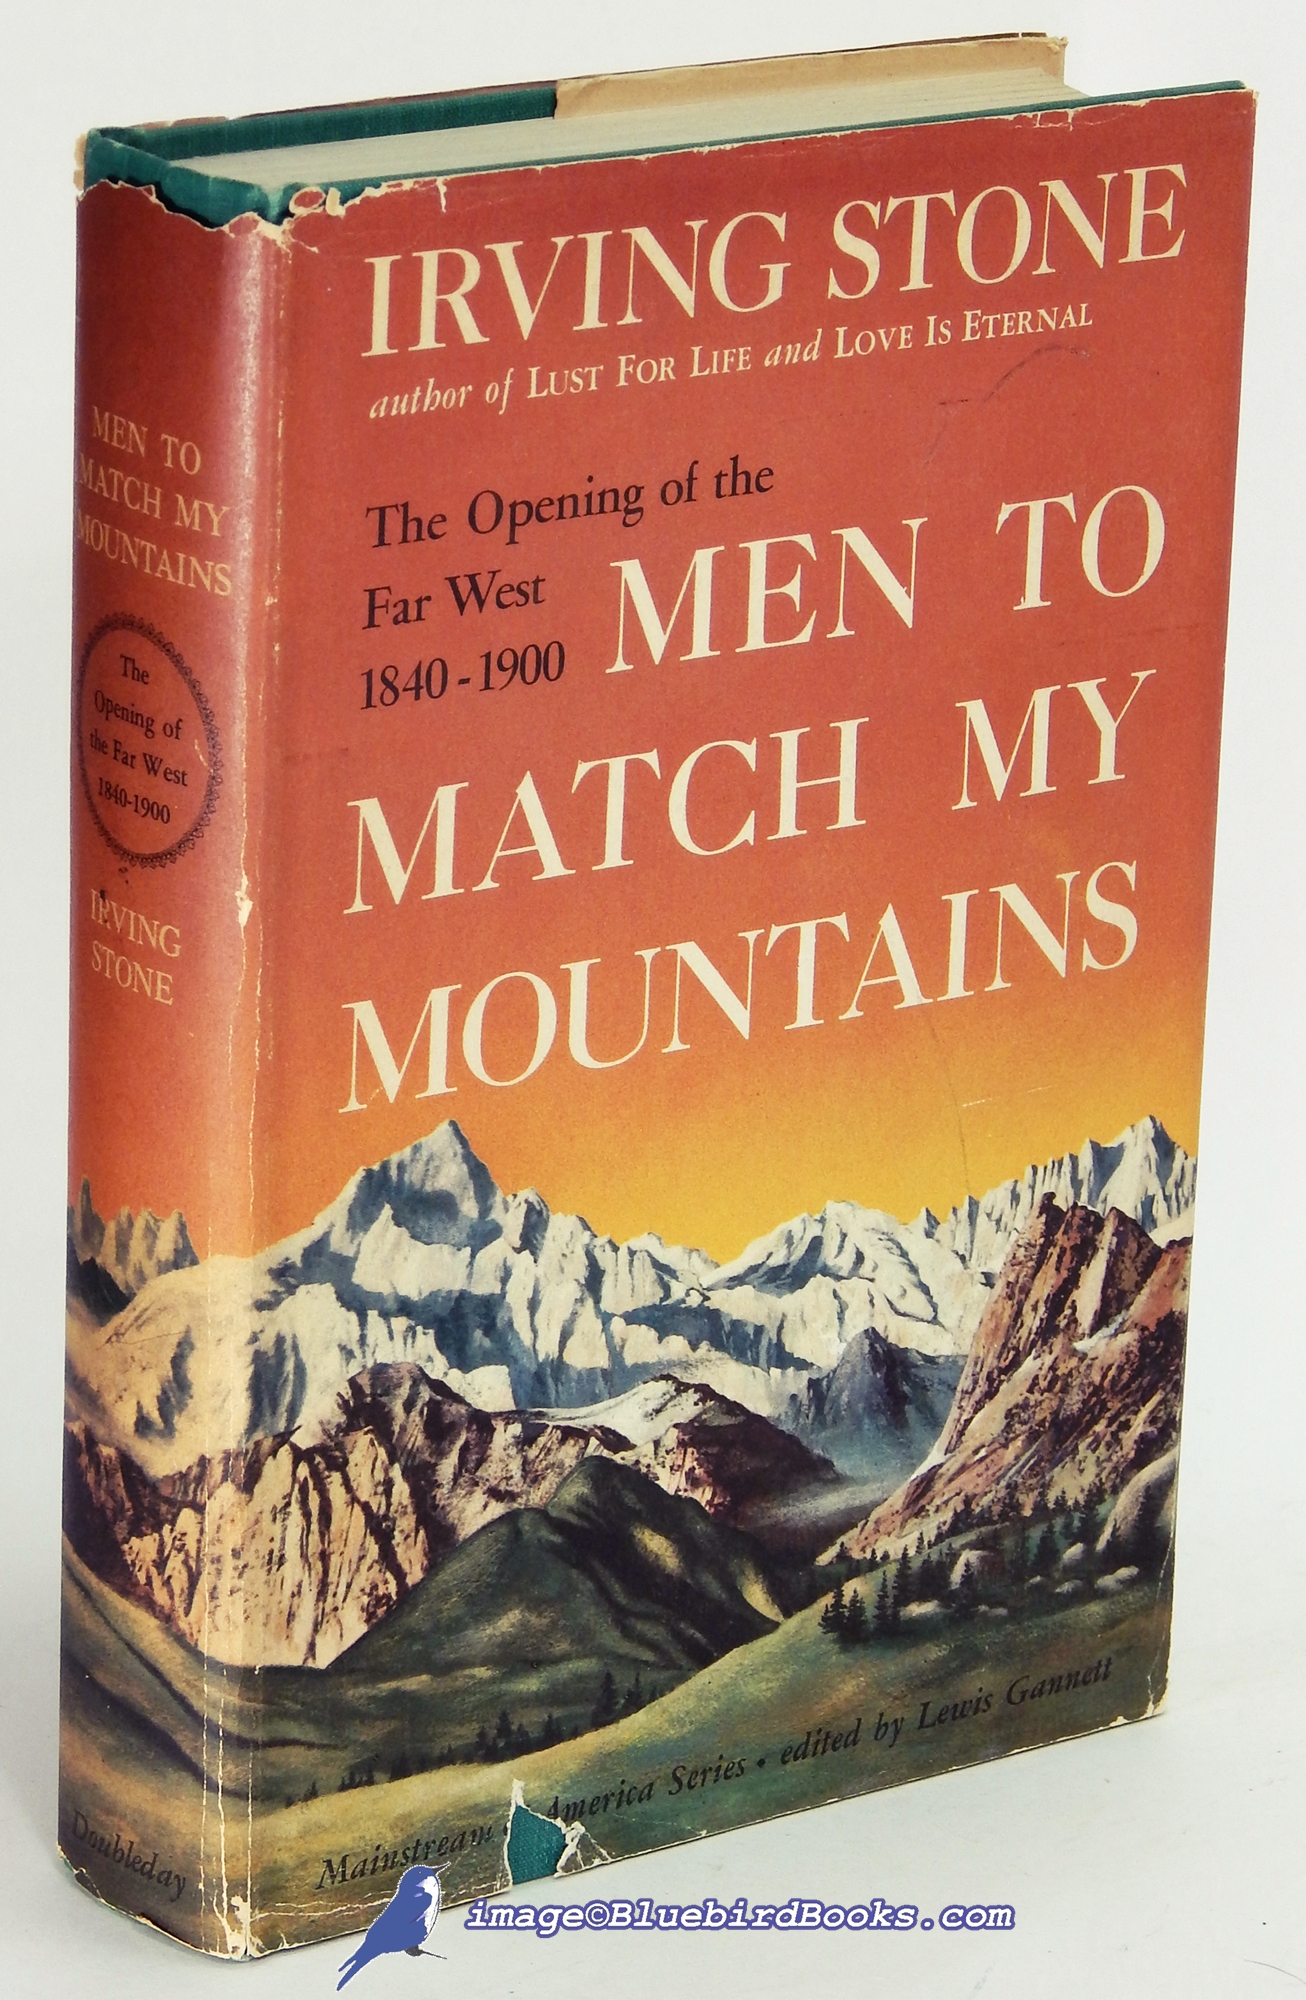 STONE, IRVING - Men to Match My Mountains: The Opening of the Far West, 1840-1900